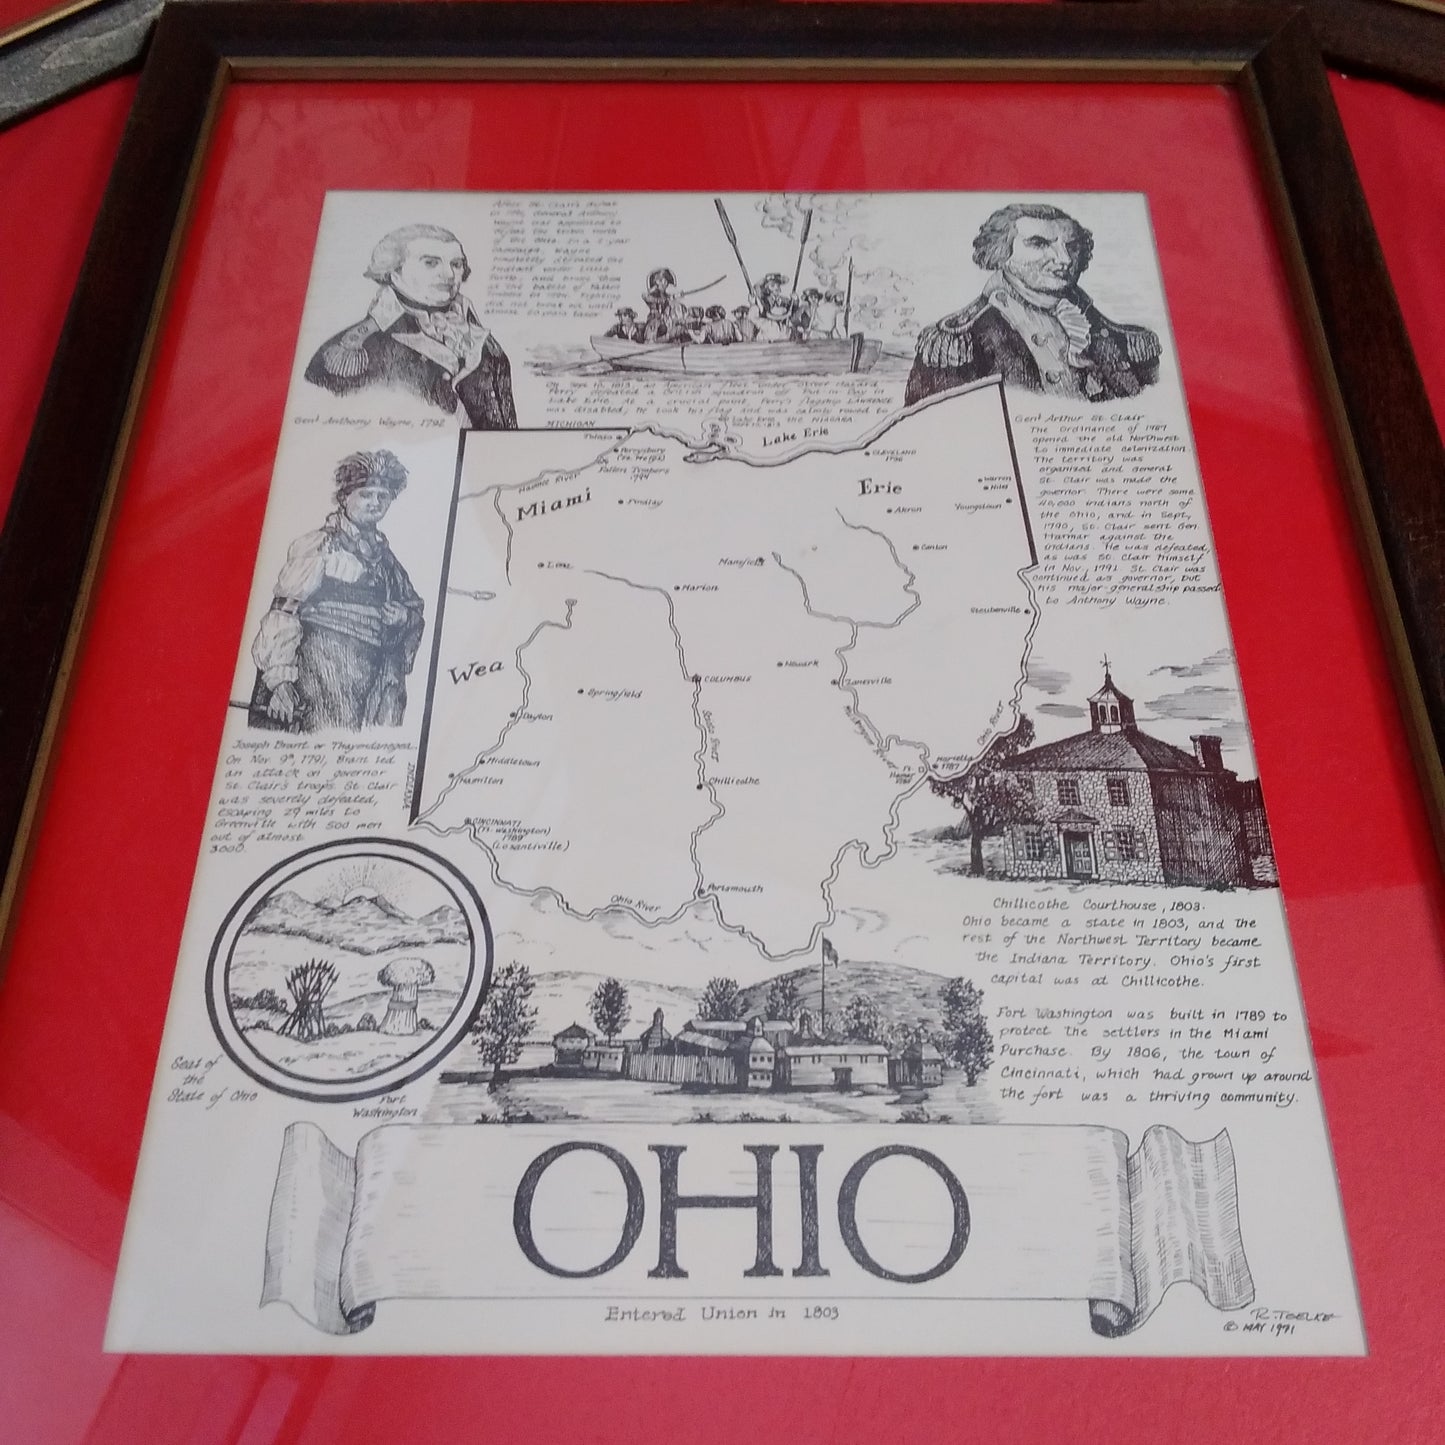 Set of 3 Framed Vintage Ronald Toelke Signed Colonial Prints - Virginia, Ohio and Maryland